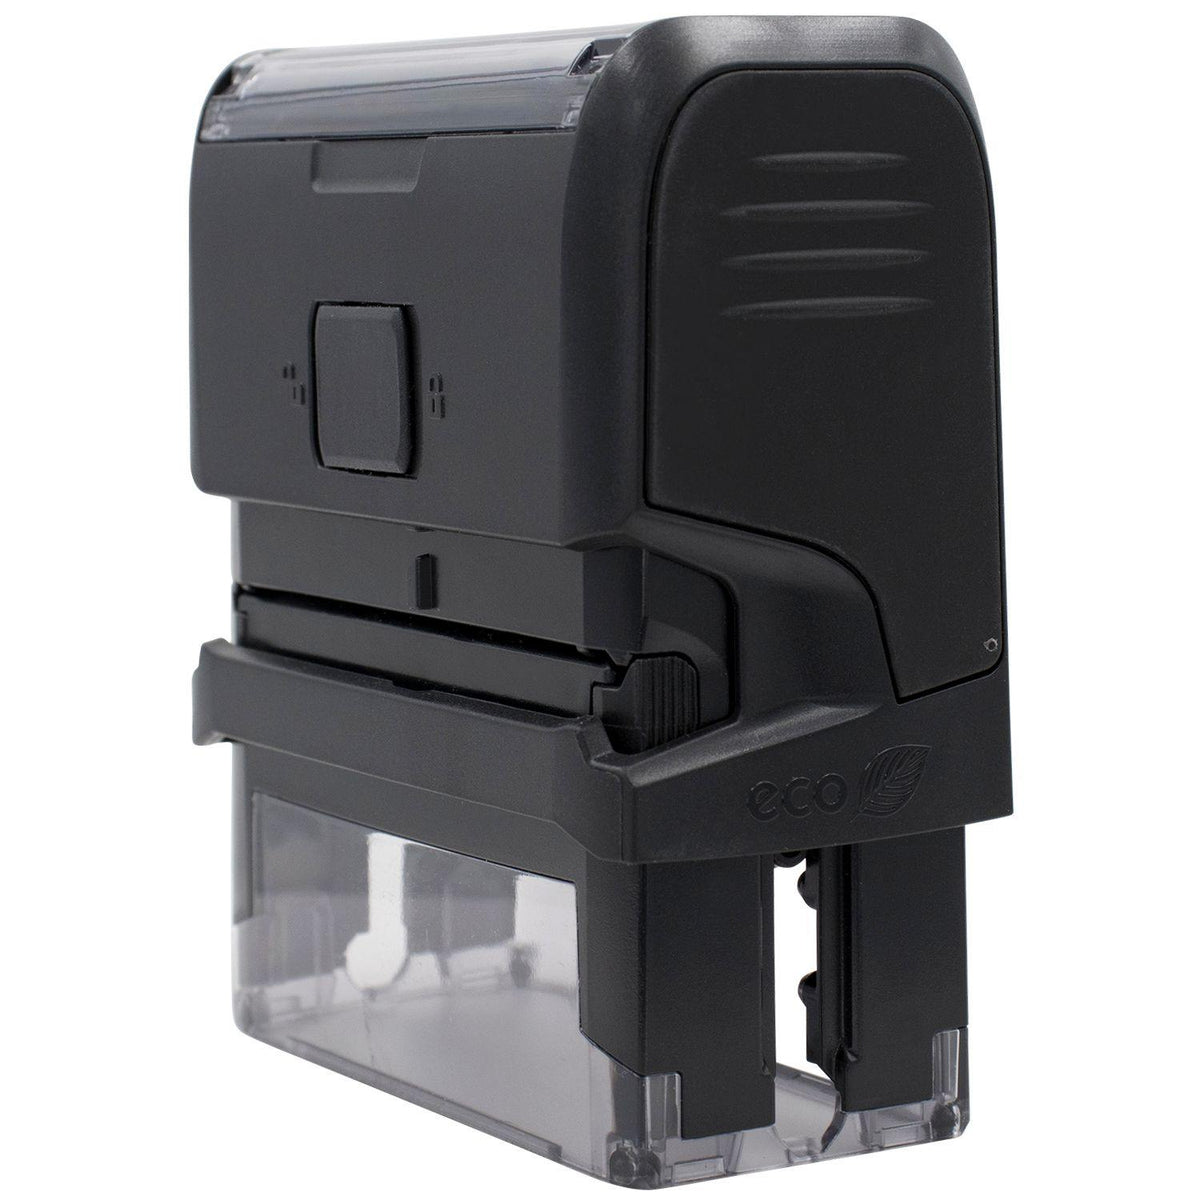 Large Self-Inking nCov Stamp - Engineer Seal Stamps - Brand_Trodat, Impression Size_Large, Stamp Type_Self-Inking Stamp, Type of Use_Medical Office